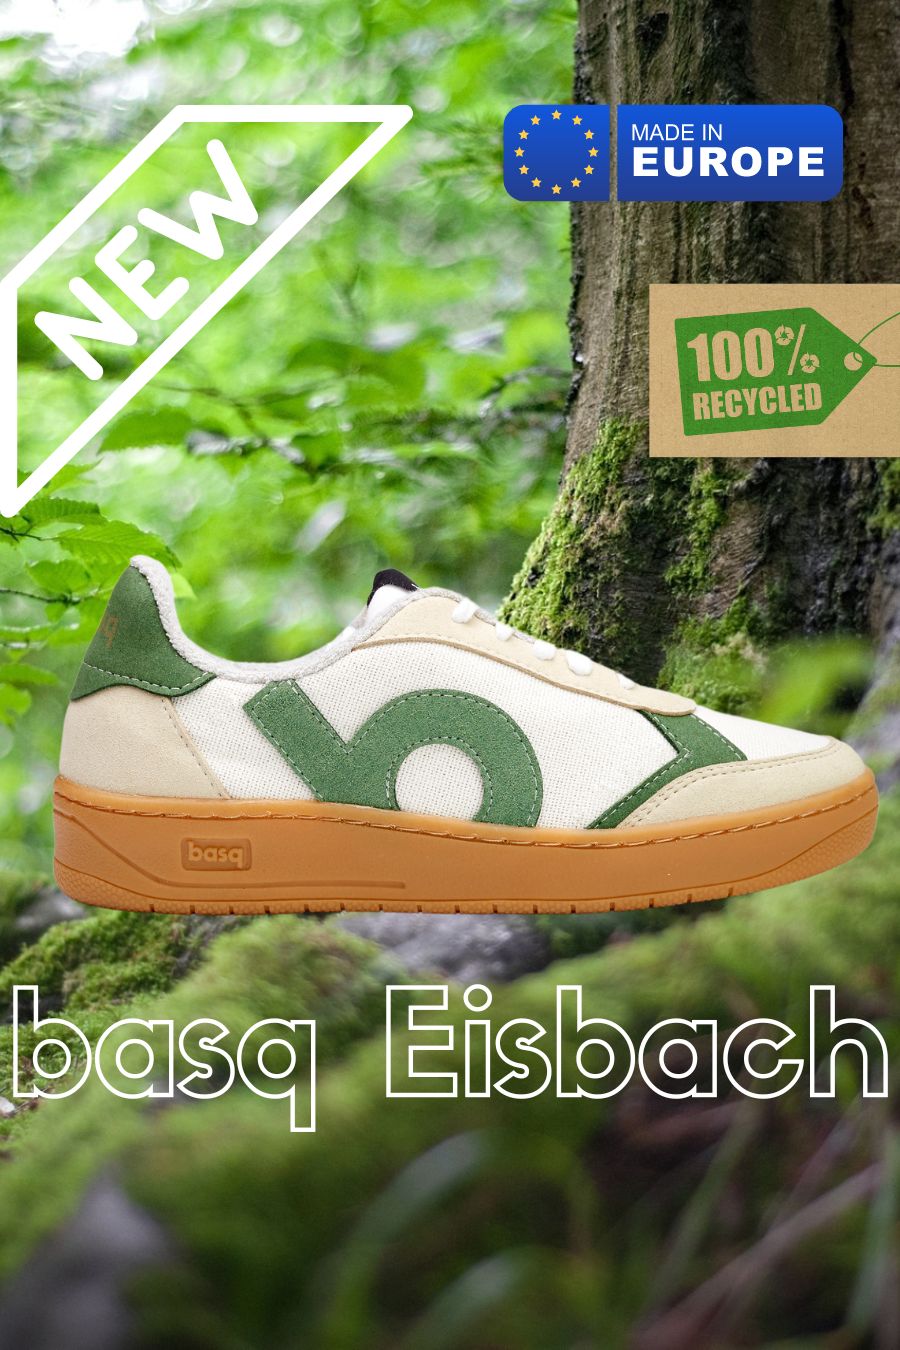 Eisbach - Where style meets sustainability